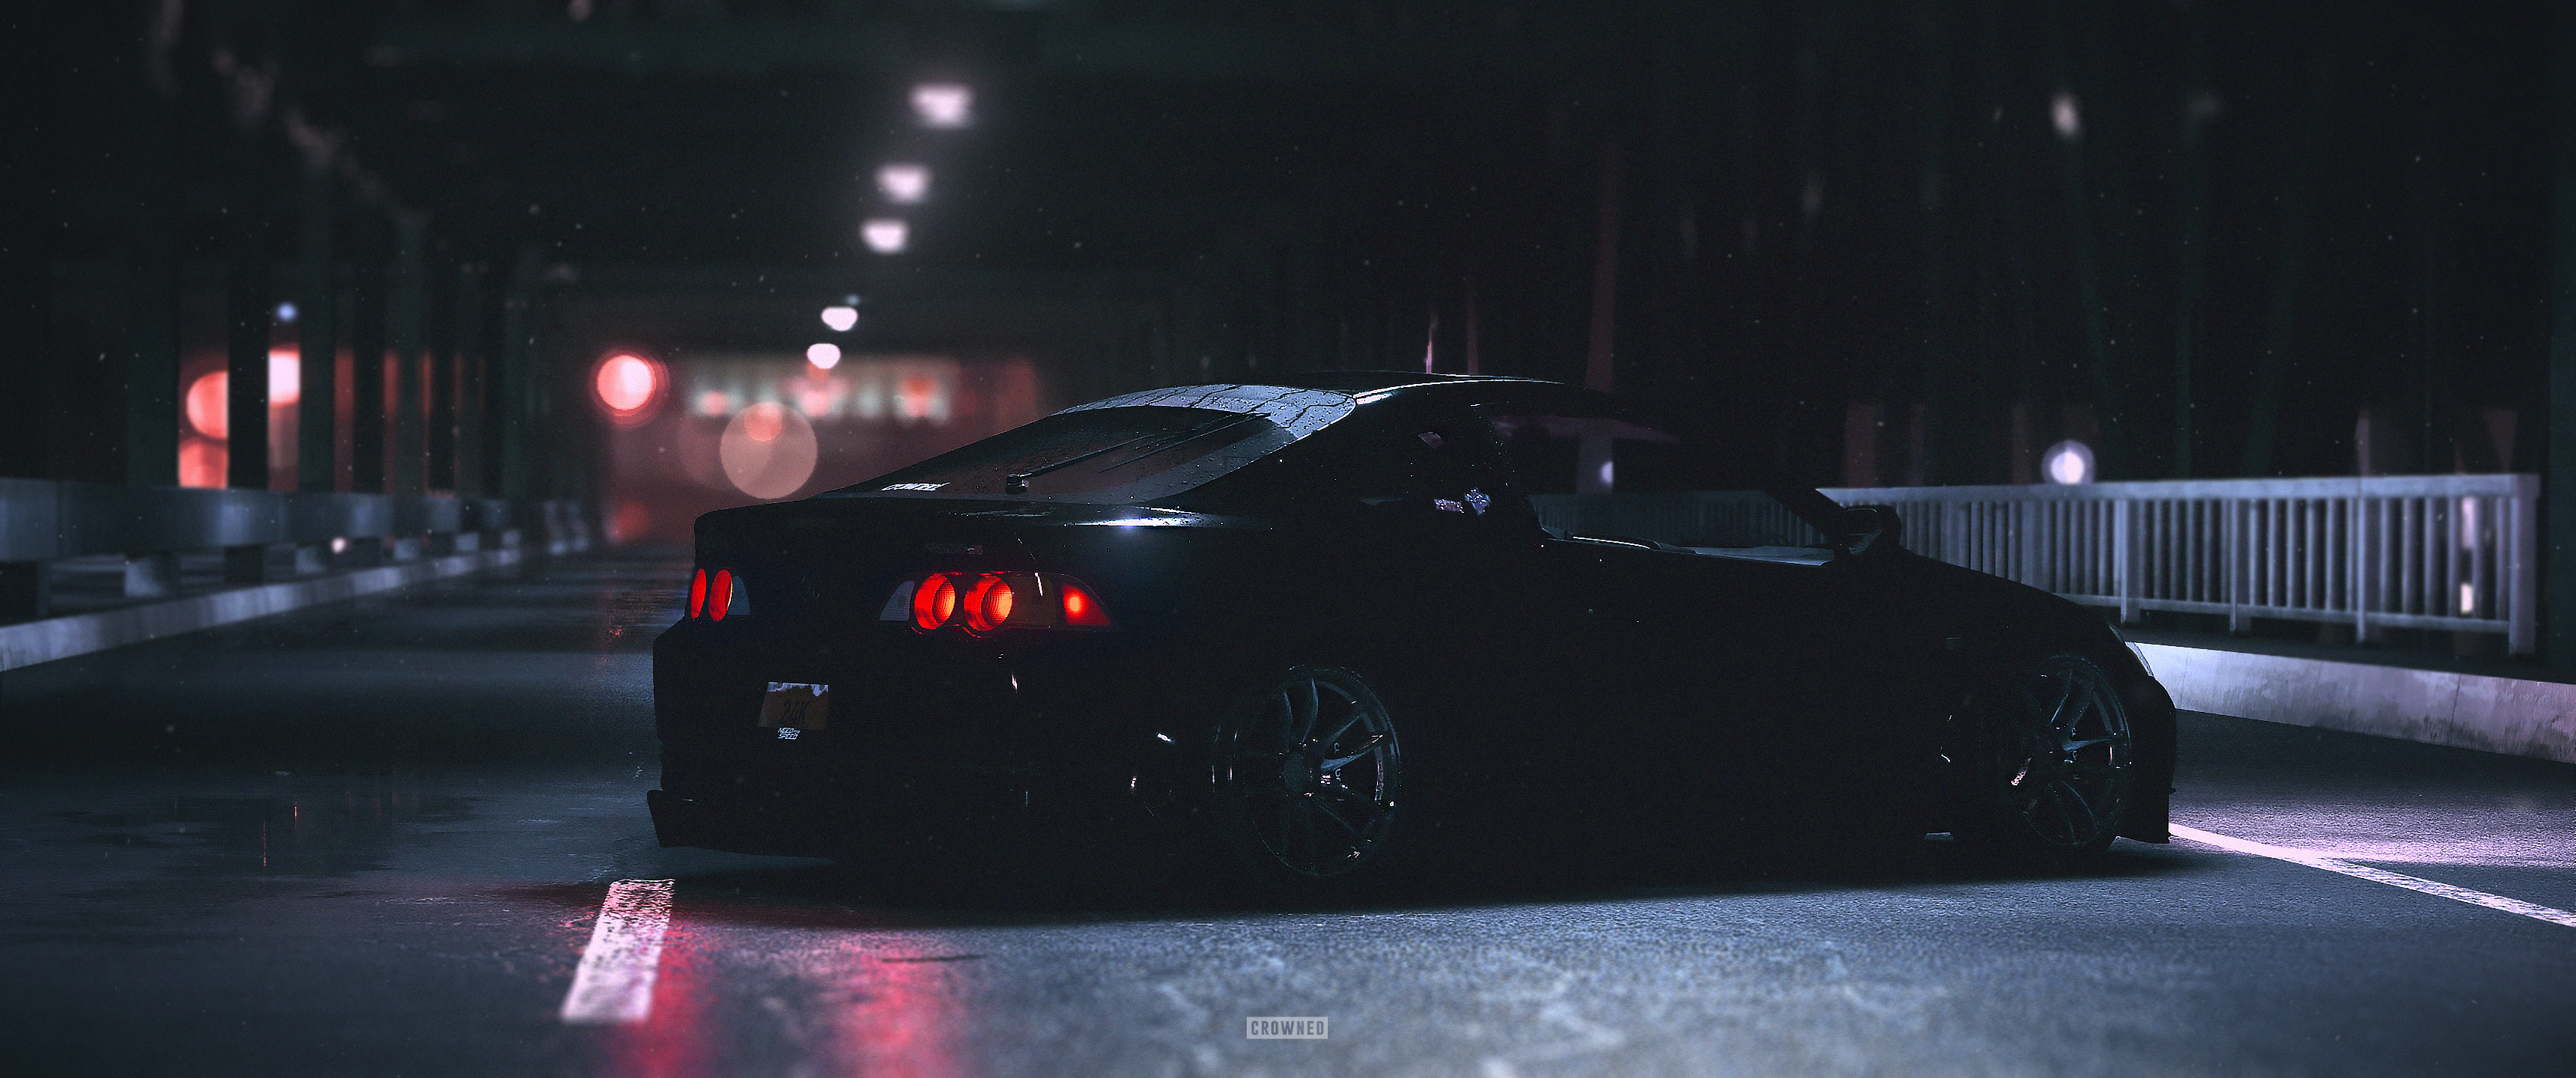 CROWNED, Need for Speed Wallpaper